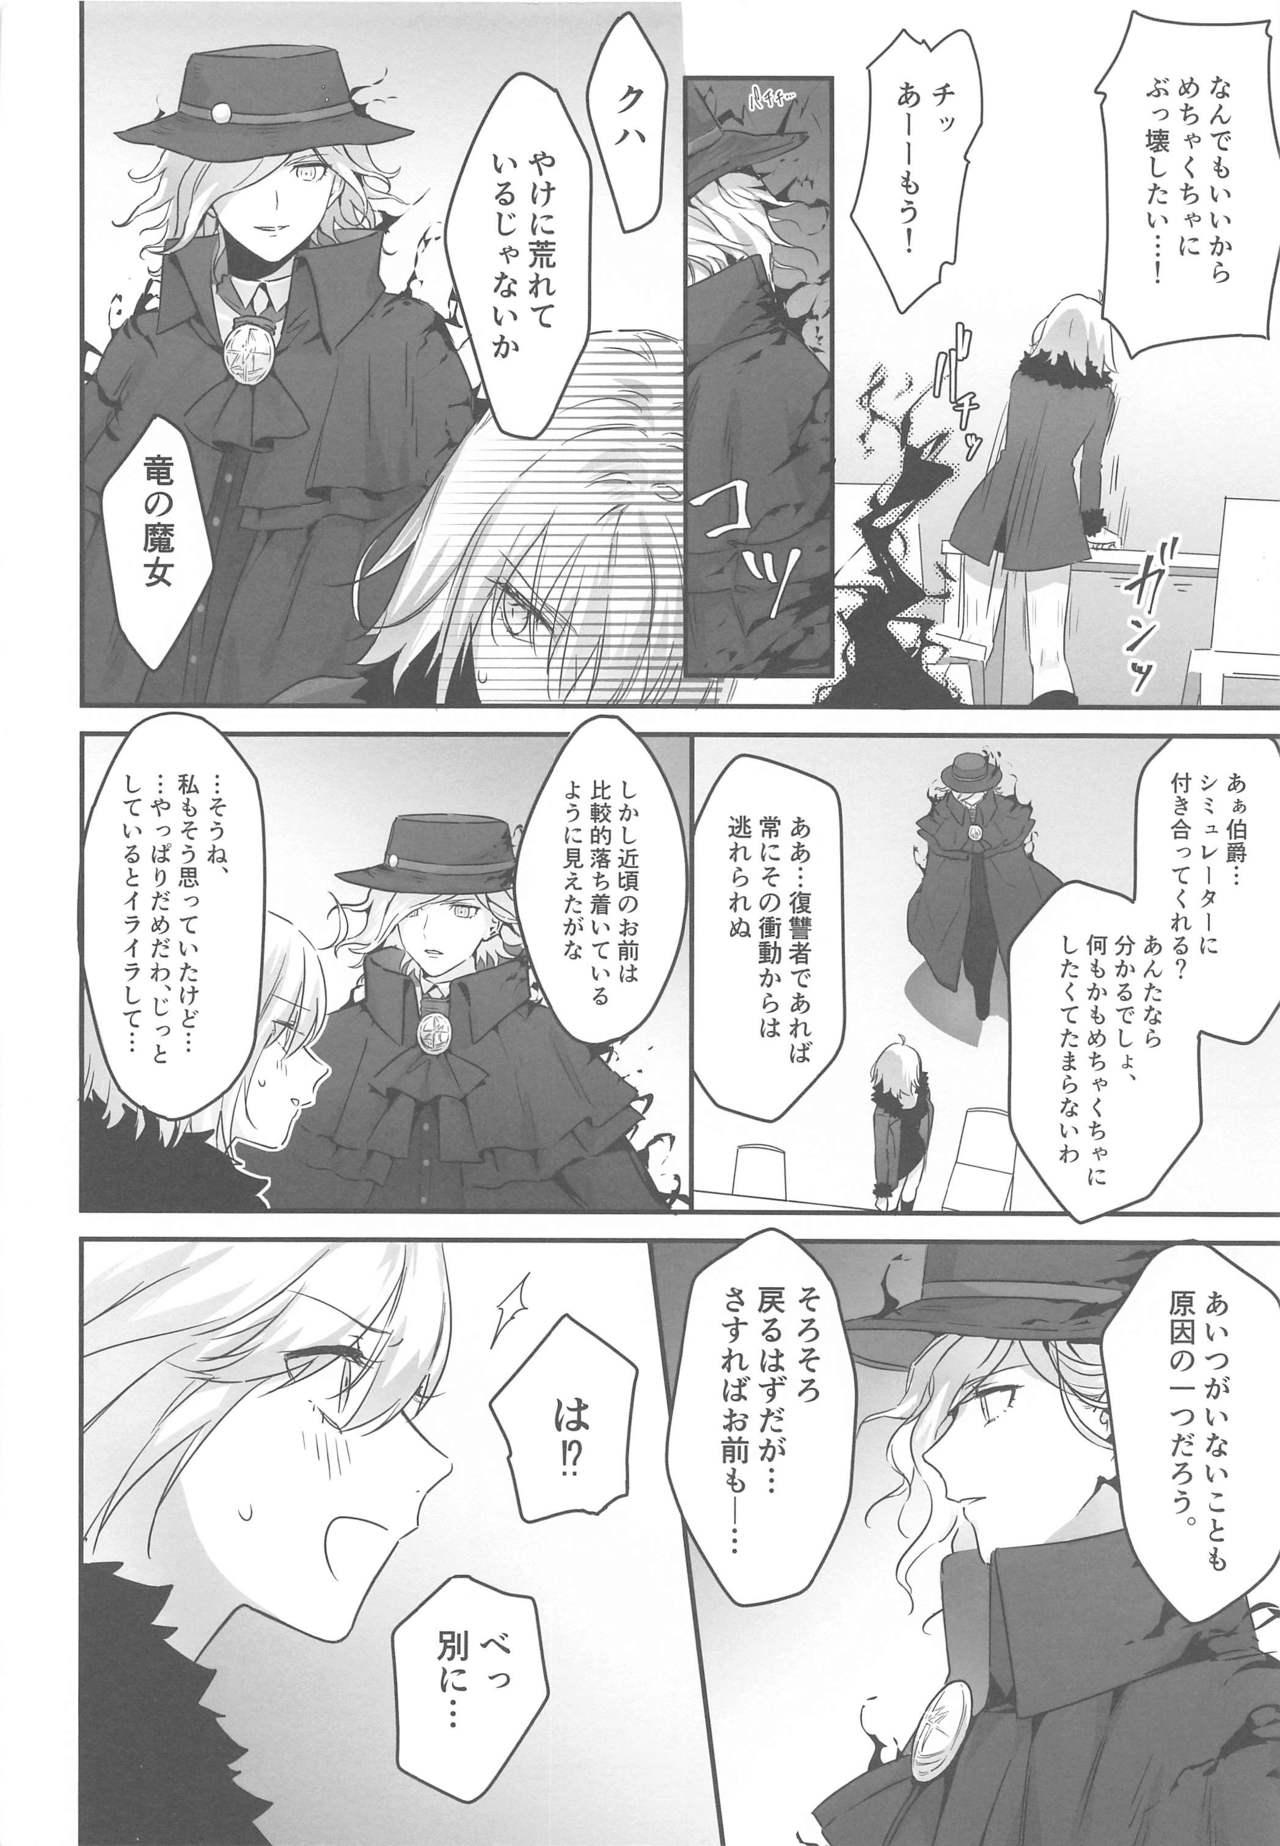 Peeing alter's secret. - Fate grand order Skype - Page 7